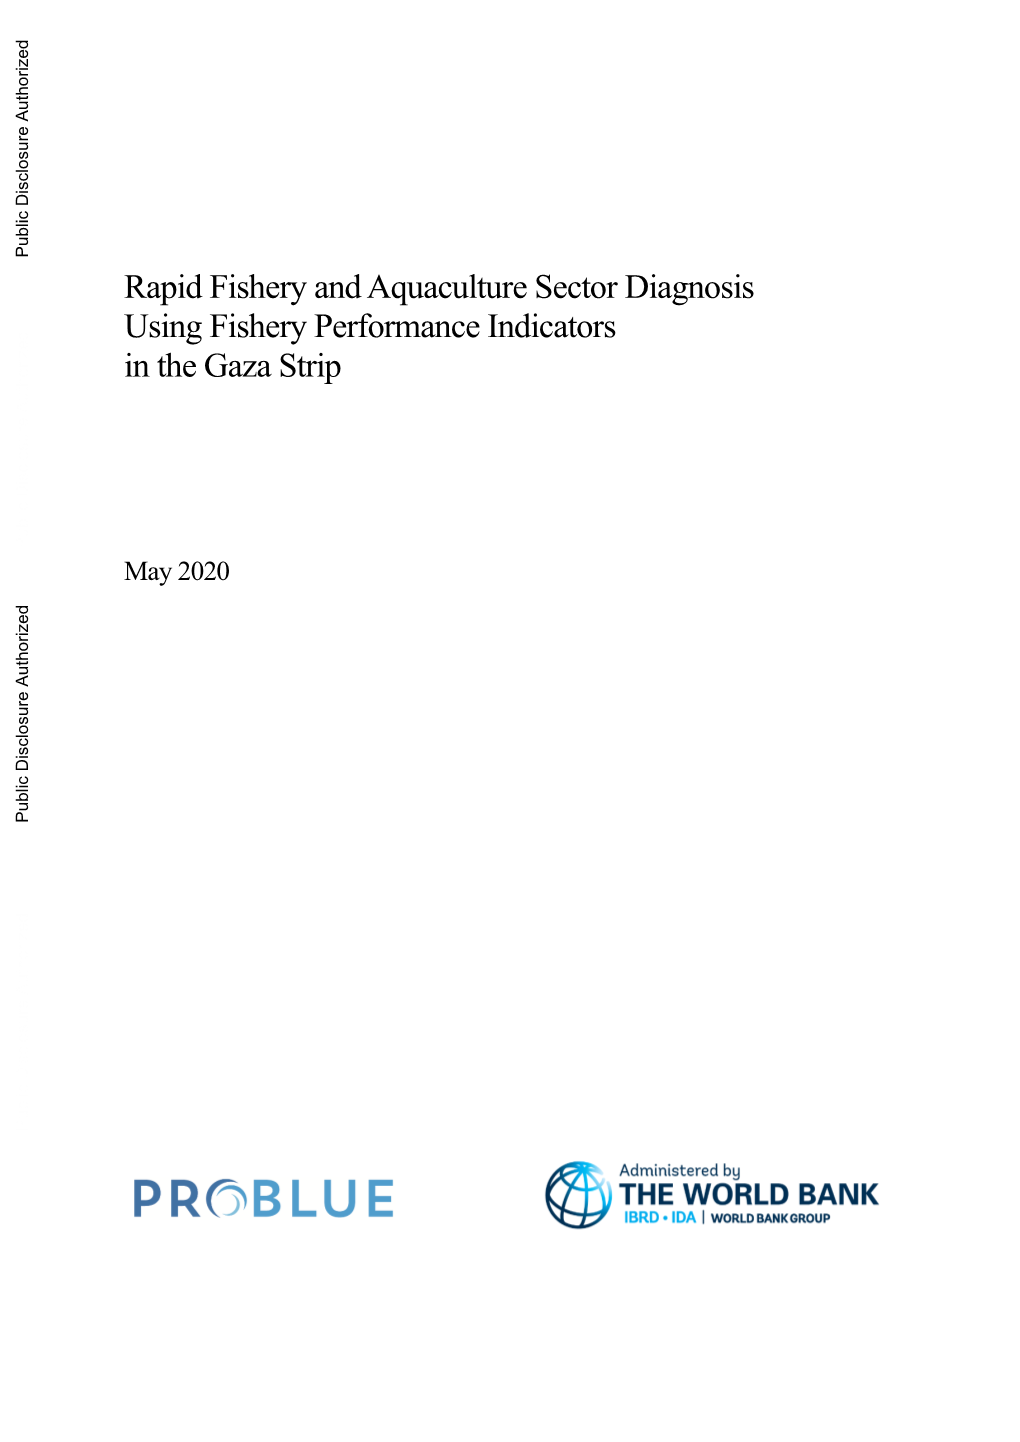 Rapid Fishery and Aquaculture Sector Diagnosis Using Fishery Performance Indicators in the Gaza Strip